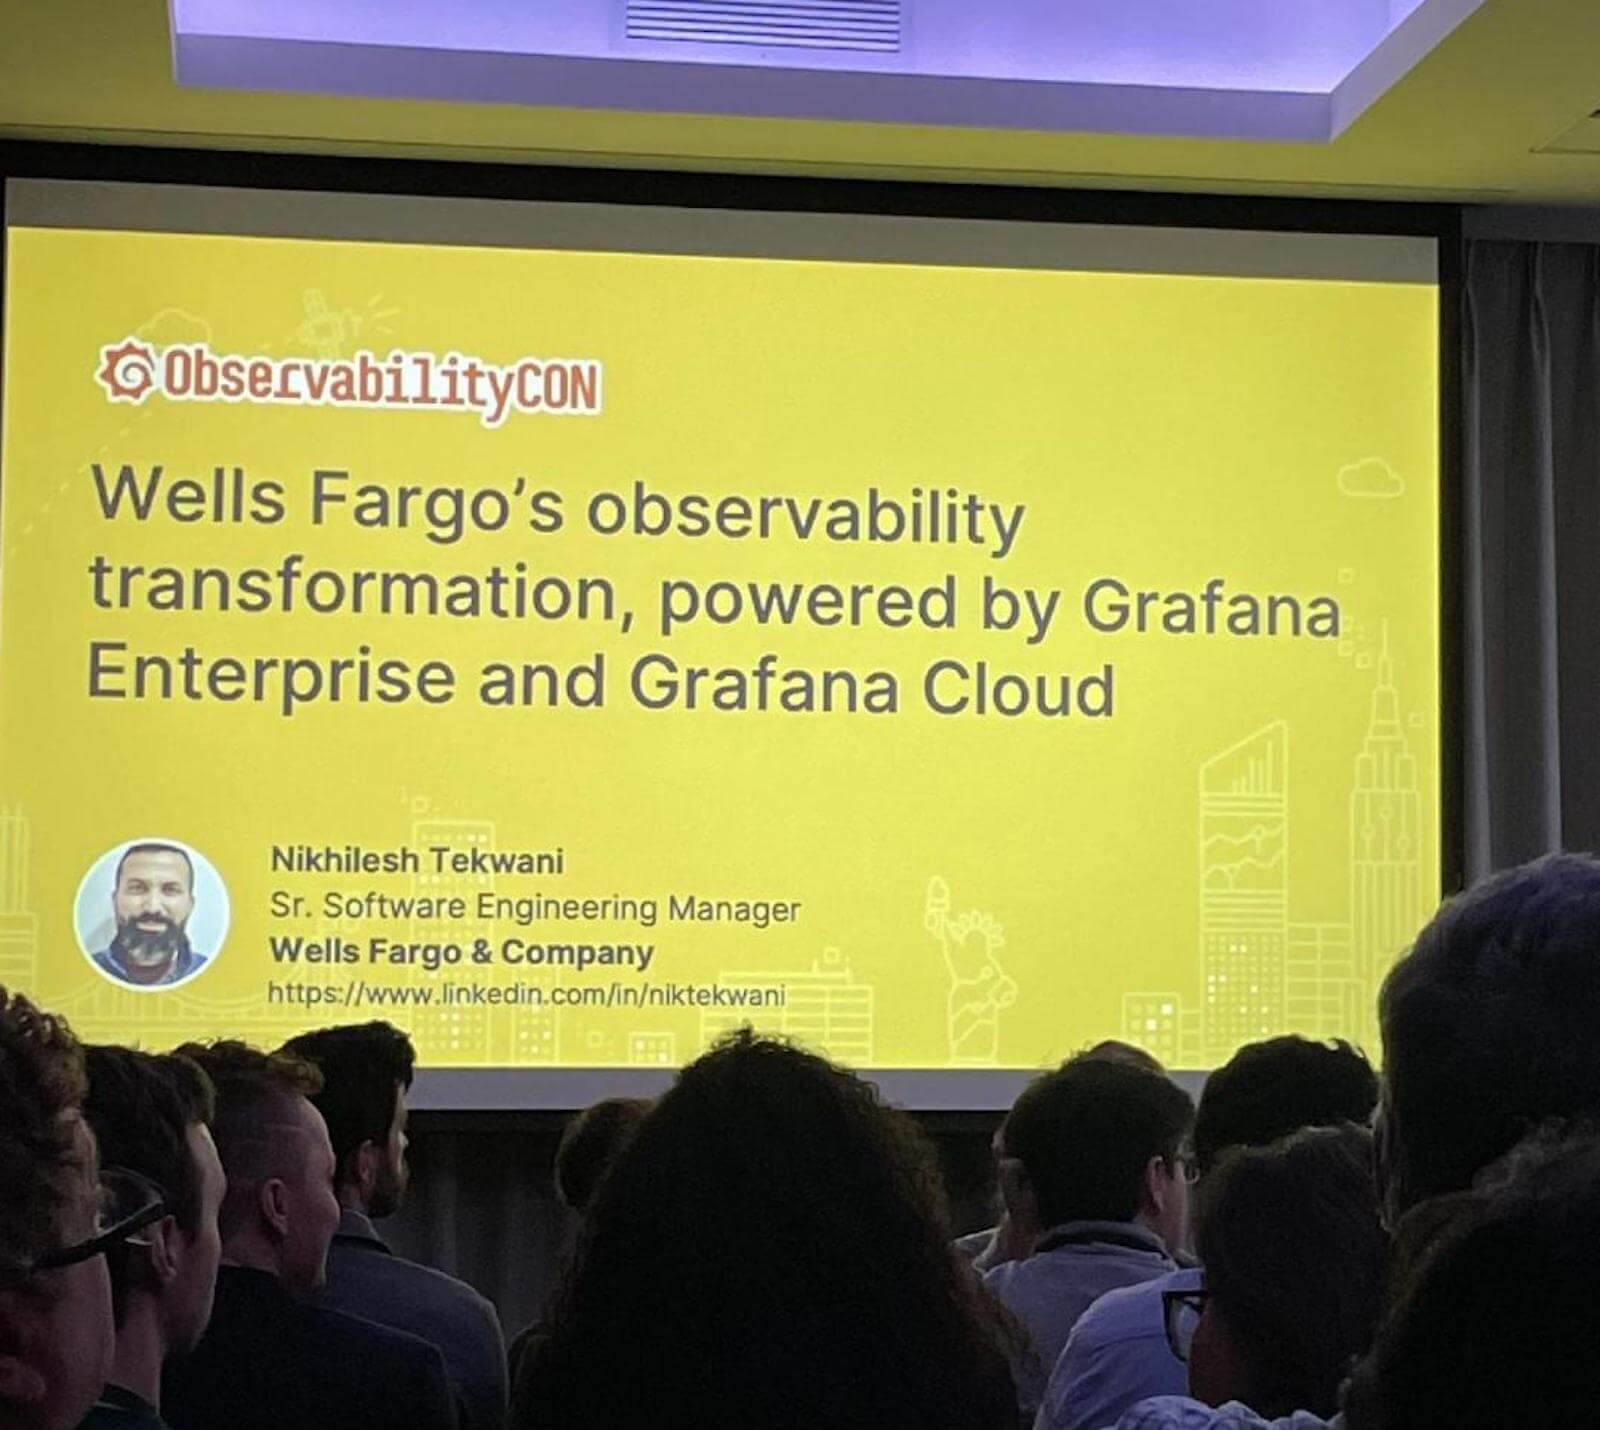 An image from a Wells Fargo presentation about using Grafana at ObservabilityCON 2022 